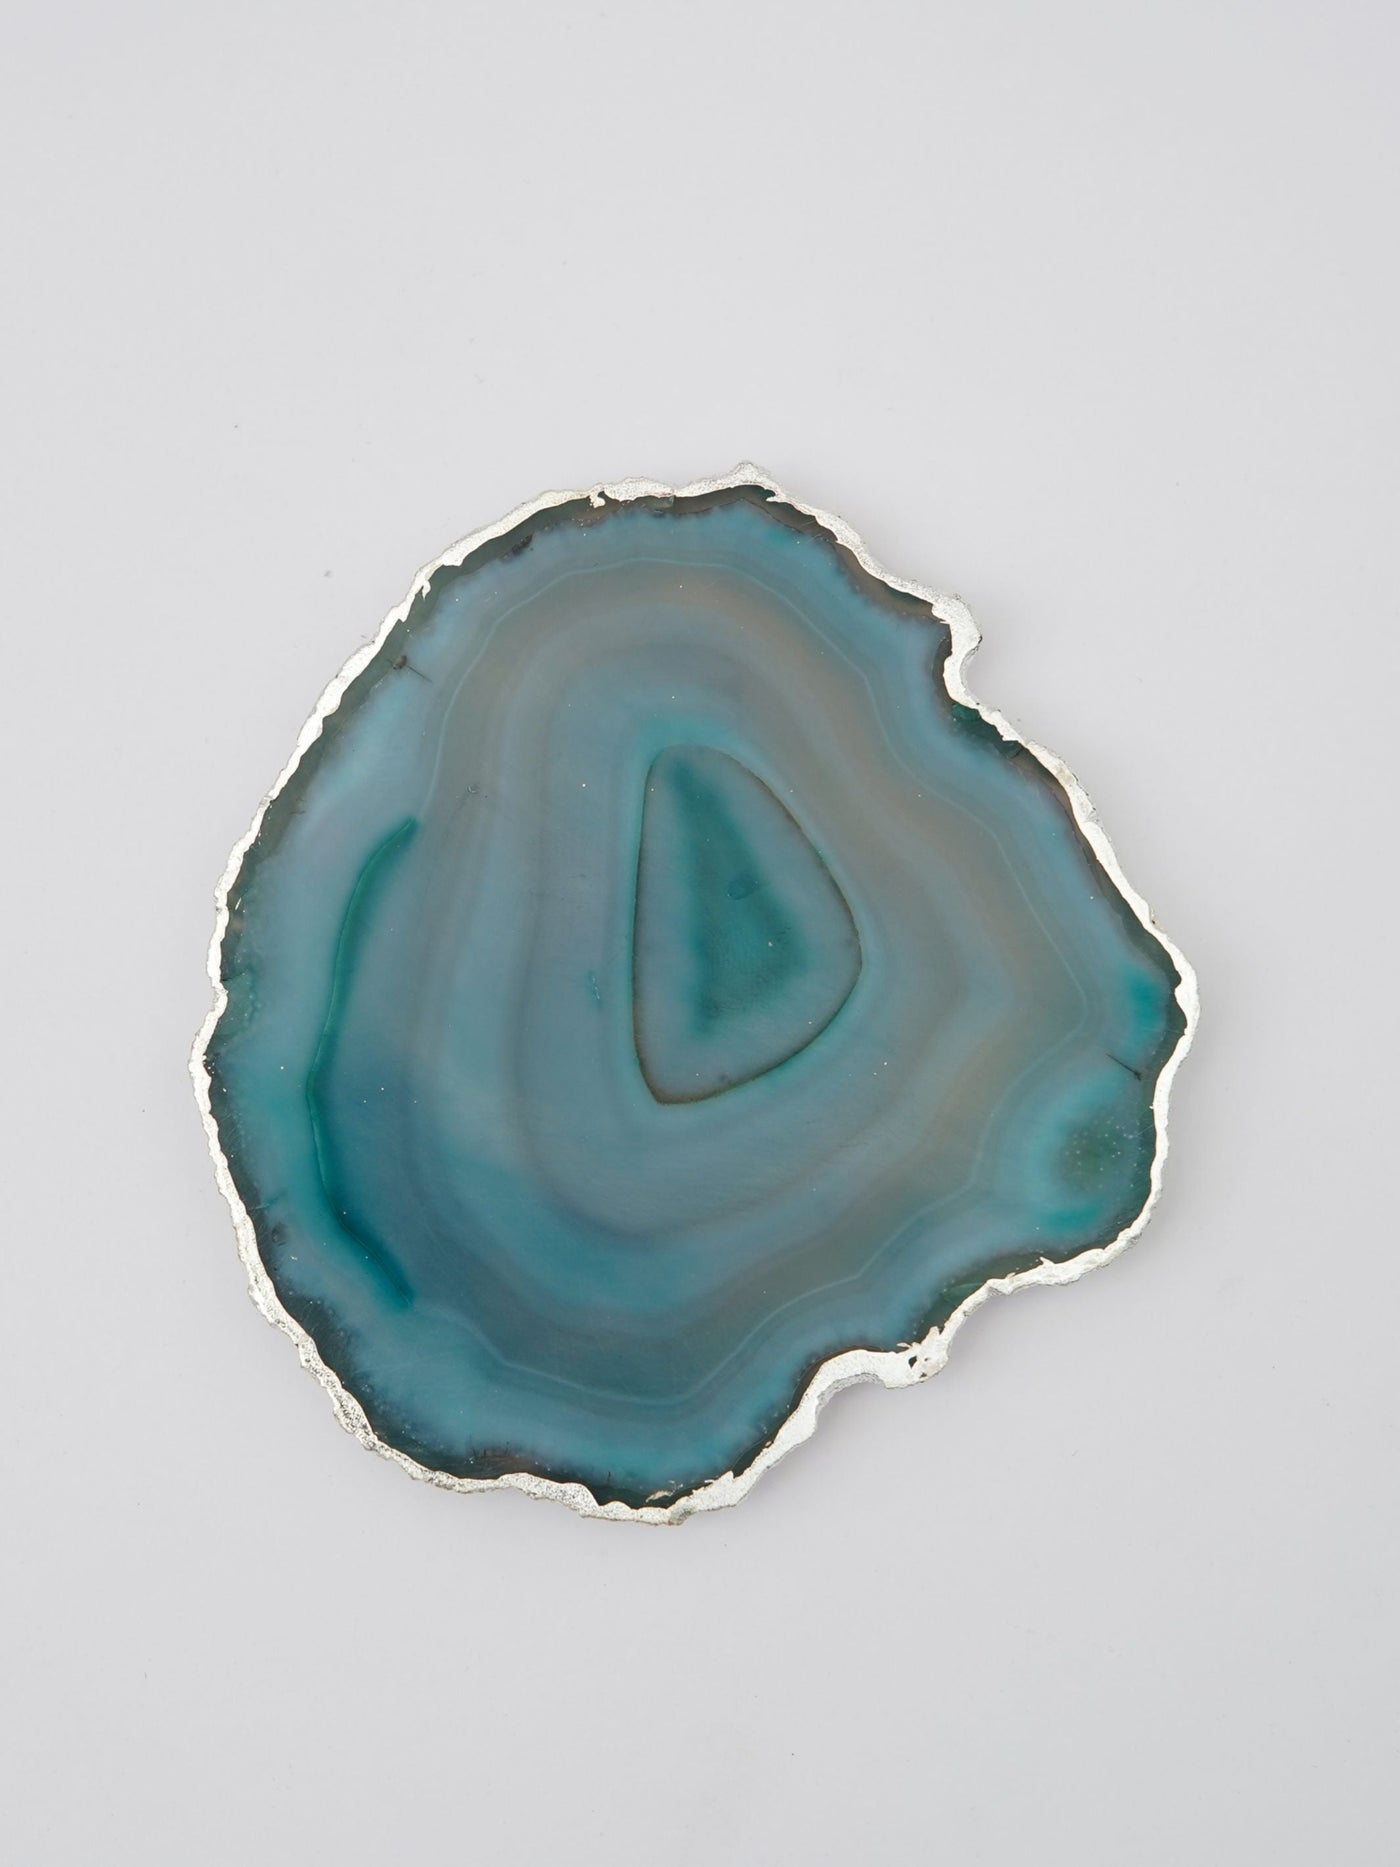 Coaster Set of 4 - Brazilian Agate Green with Silver Plated edge